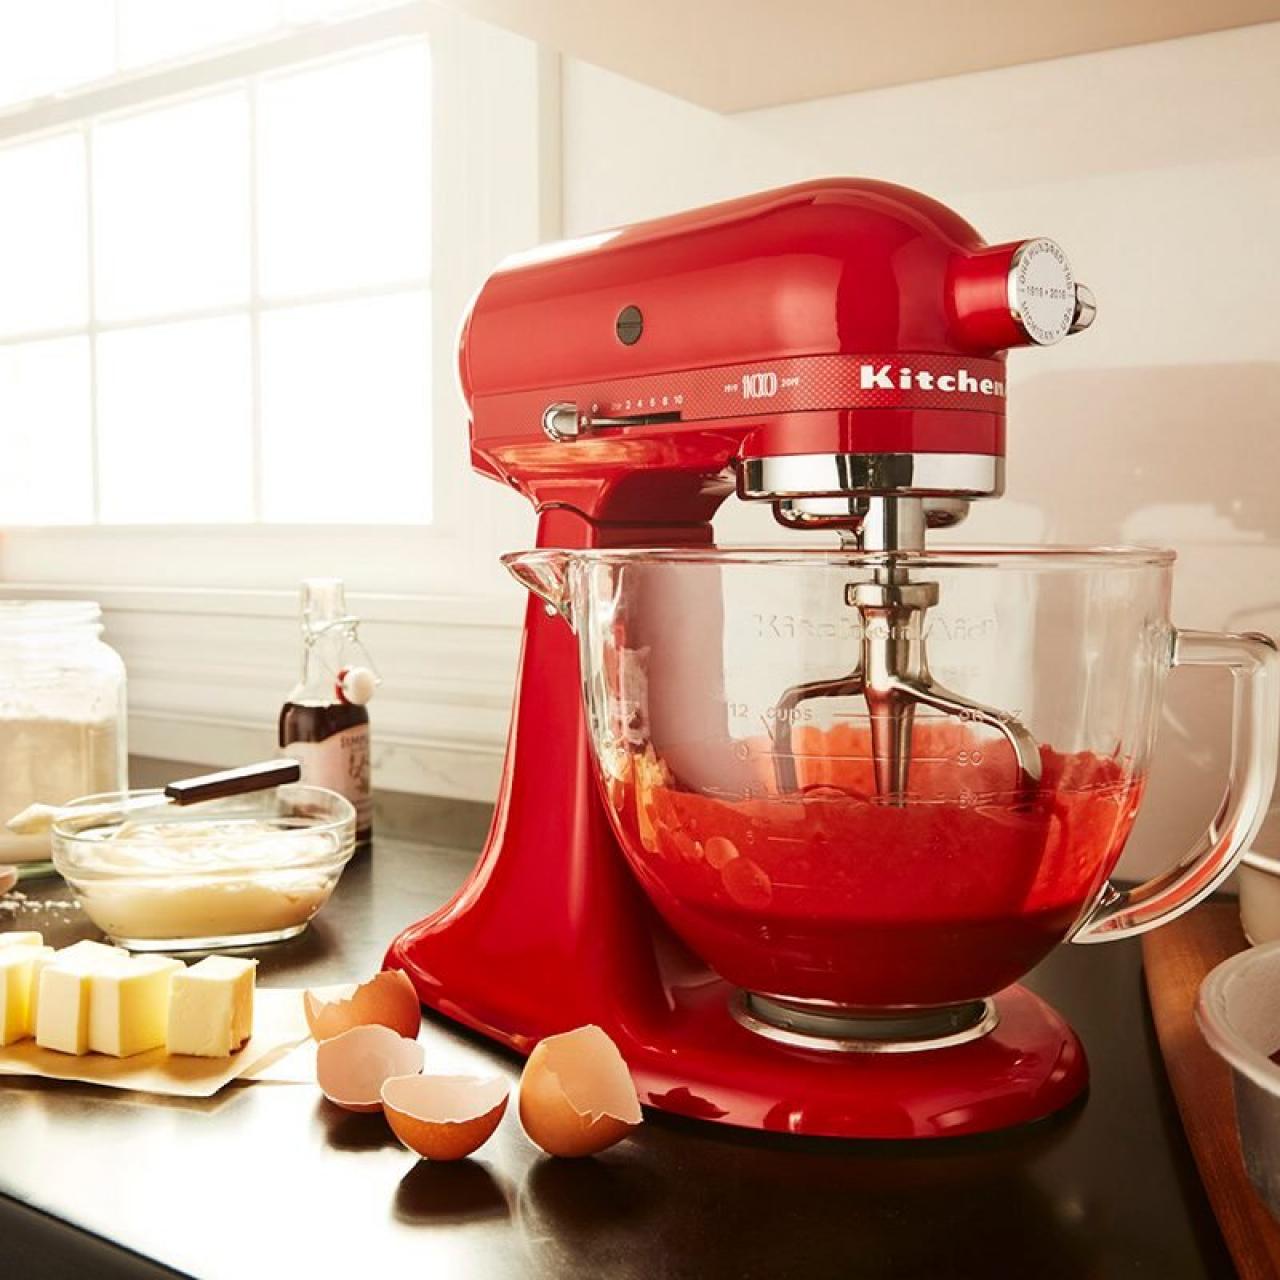 Midtown Bargains - New product added today! KitchenAid 9-speed